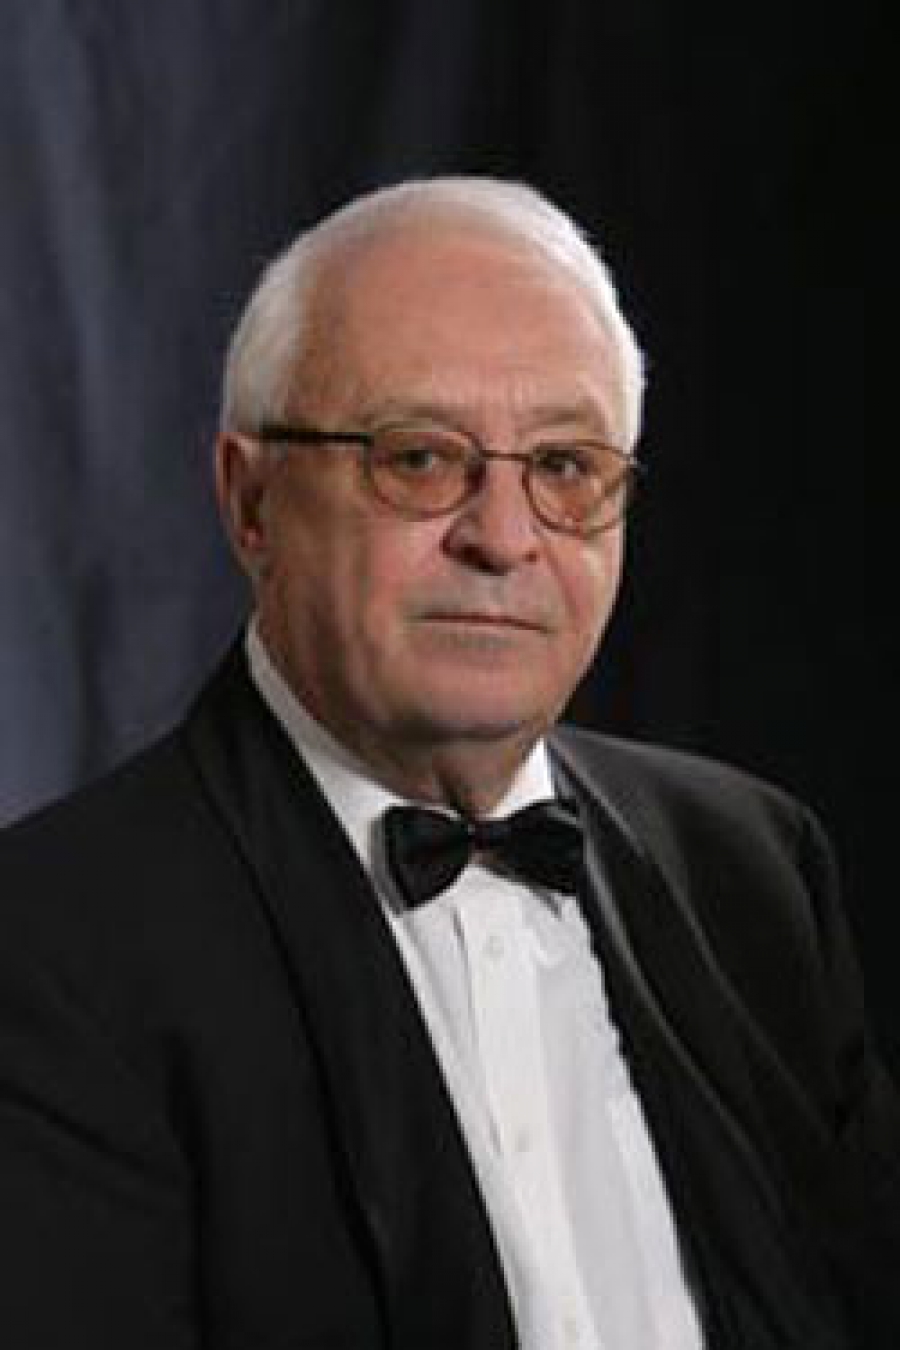 Prof. Svetozar Donev is one of the most eminent artists of modern Bulgarian theatre and music art.